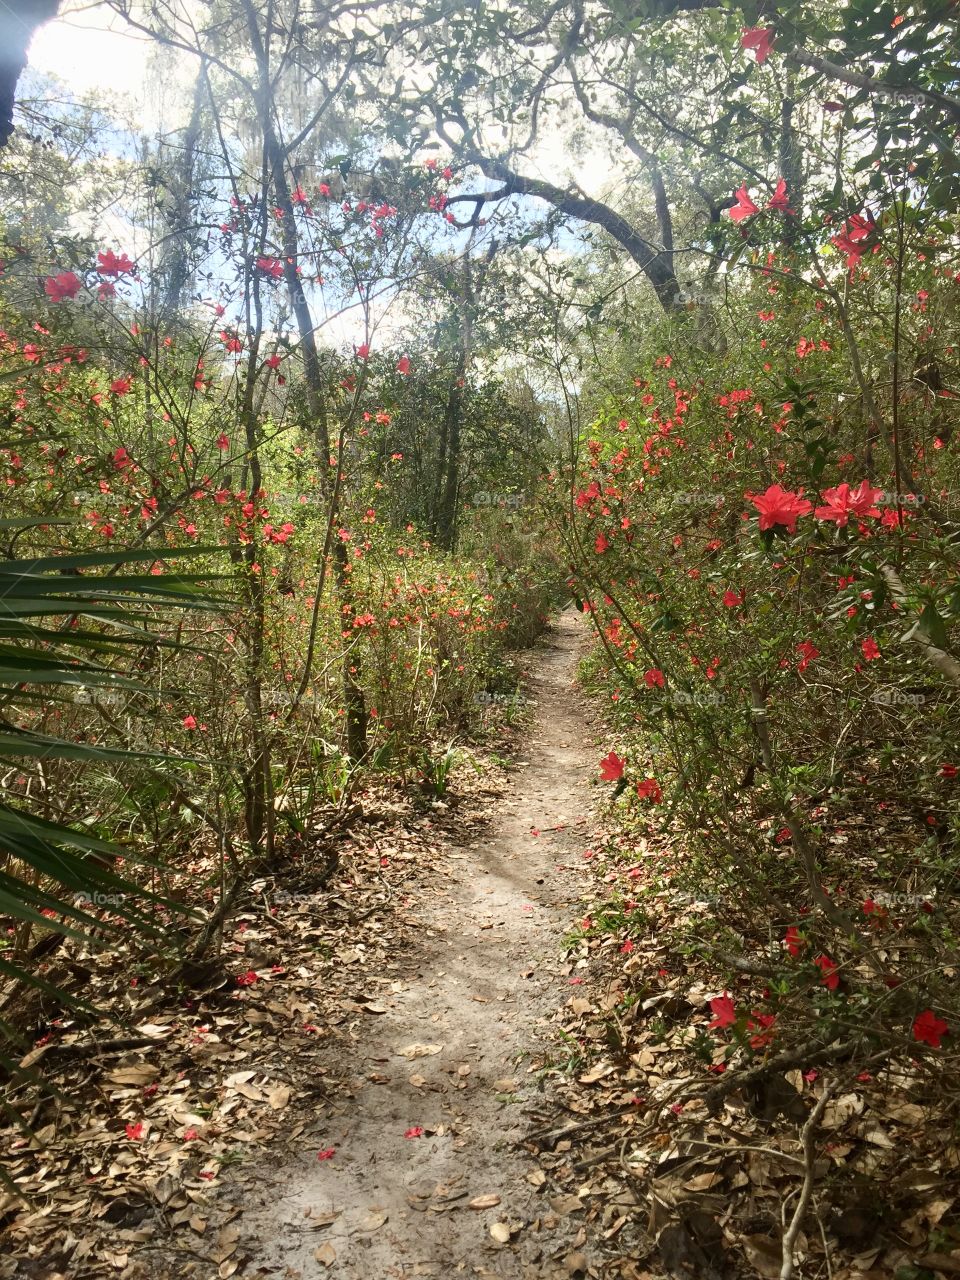 Hiking trail through the woods on a beautiful day with azalea flowers